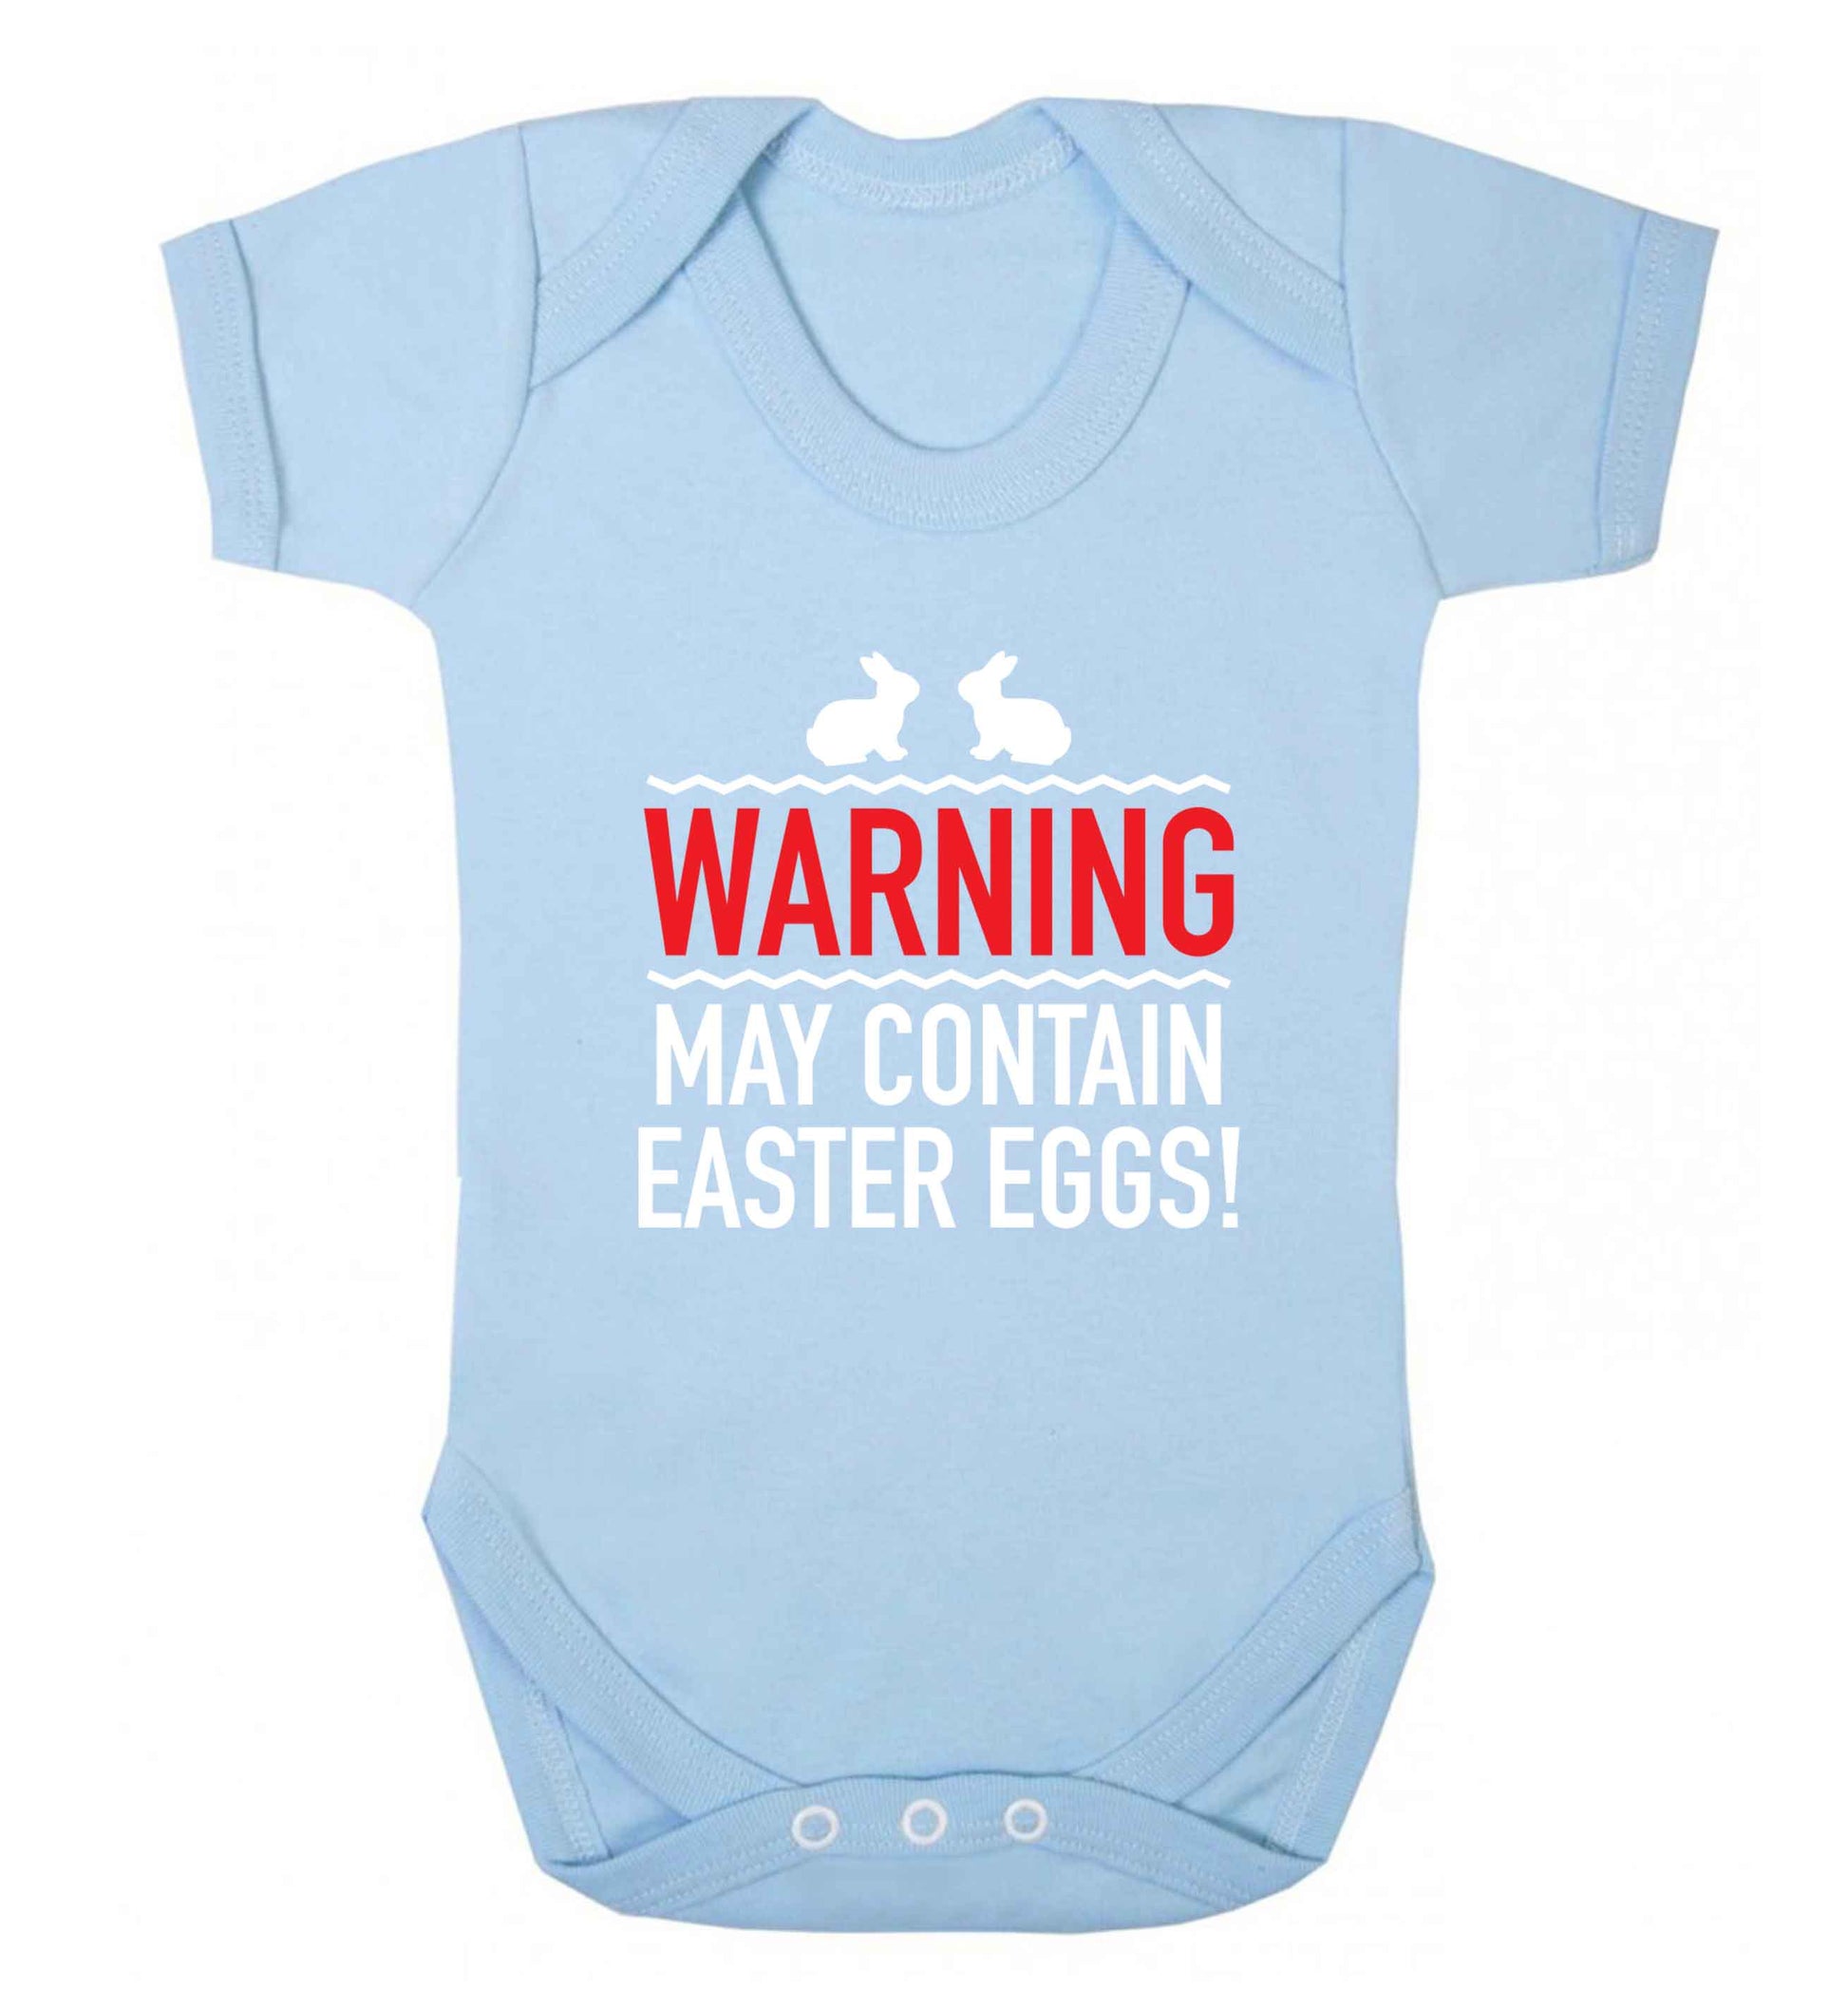 Warning may contain Easter eggs baby vest pale blue 18-24 months